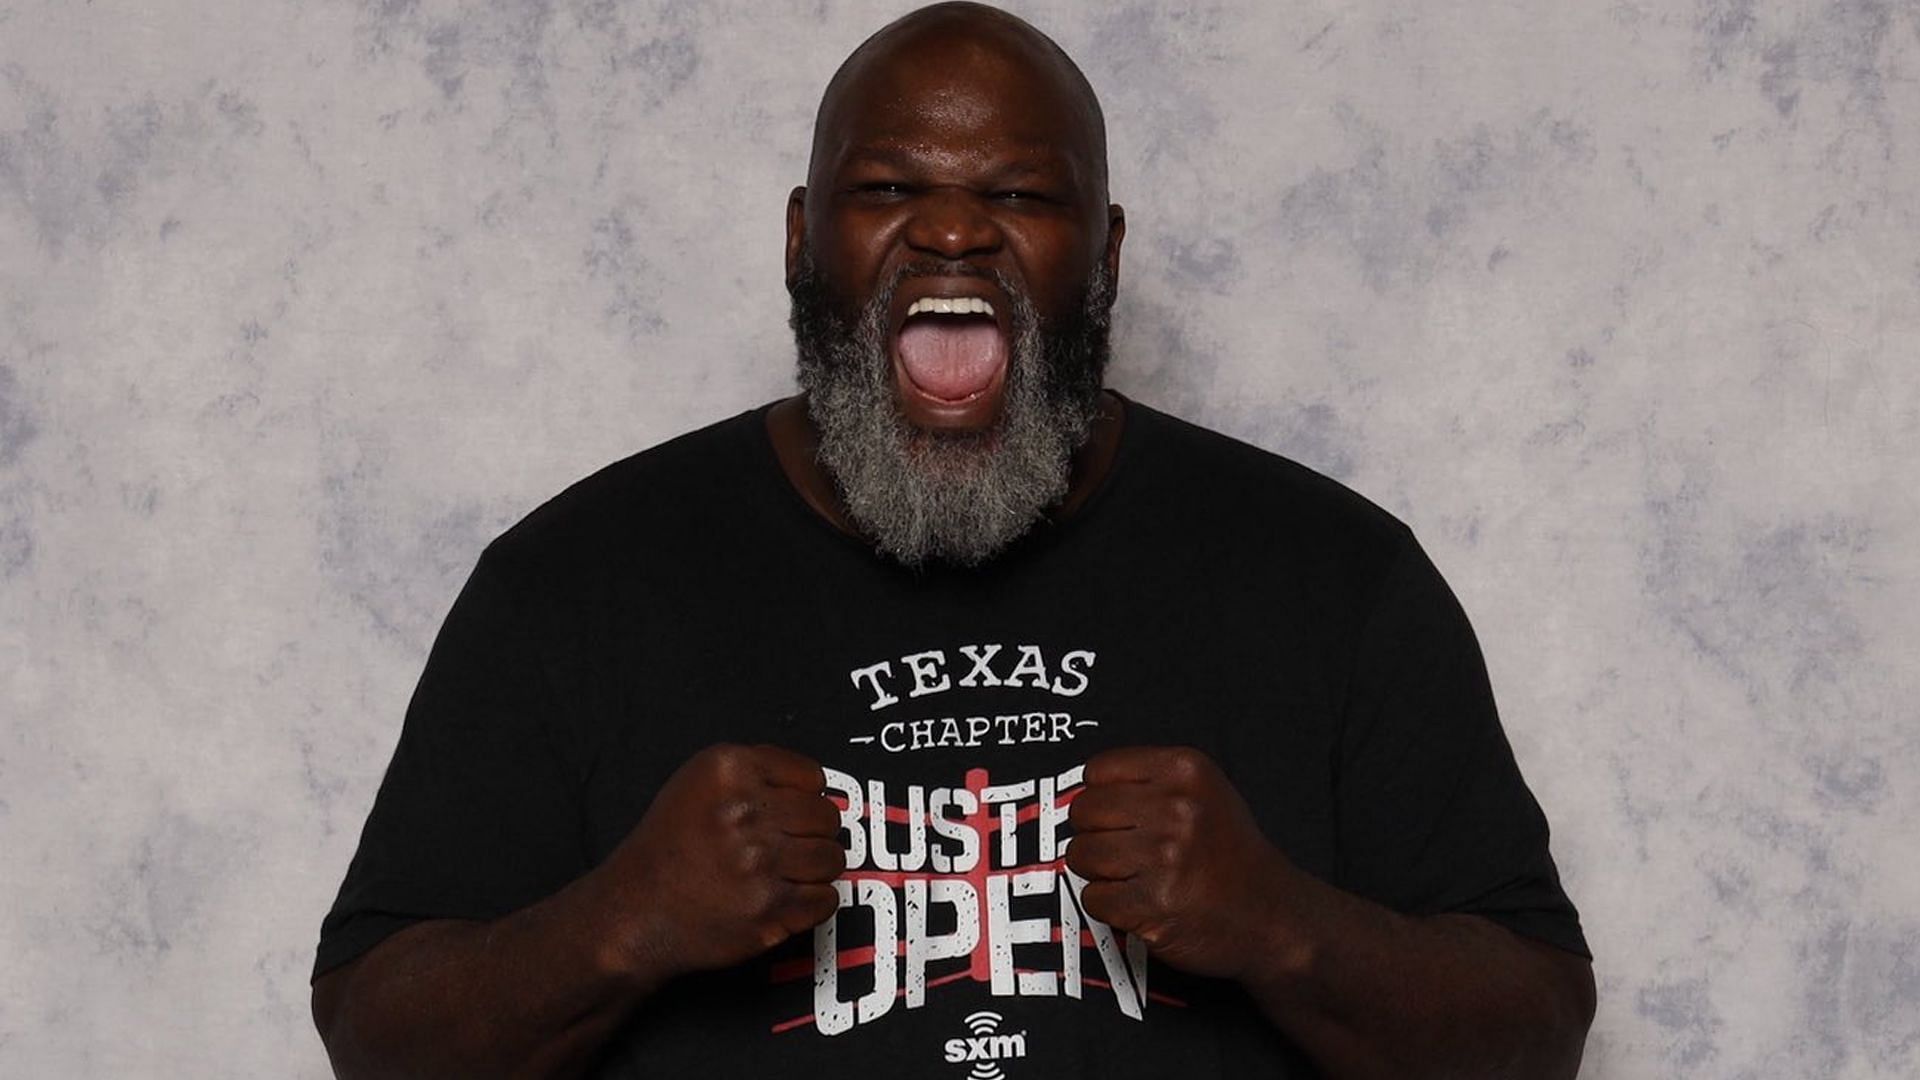 Mark Henry has been a part of AEW since 2021